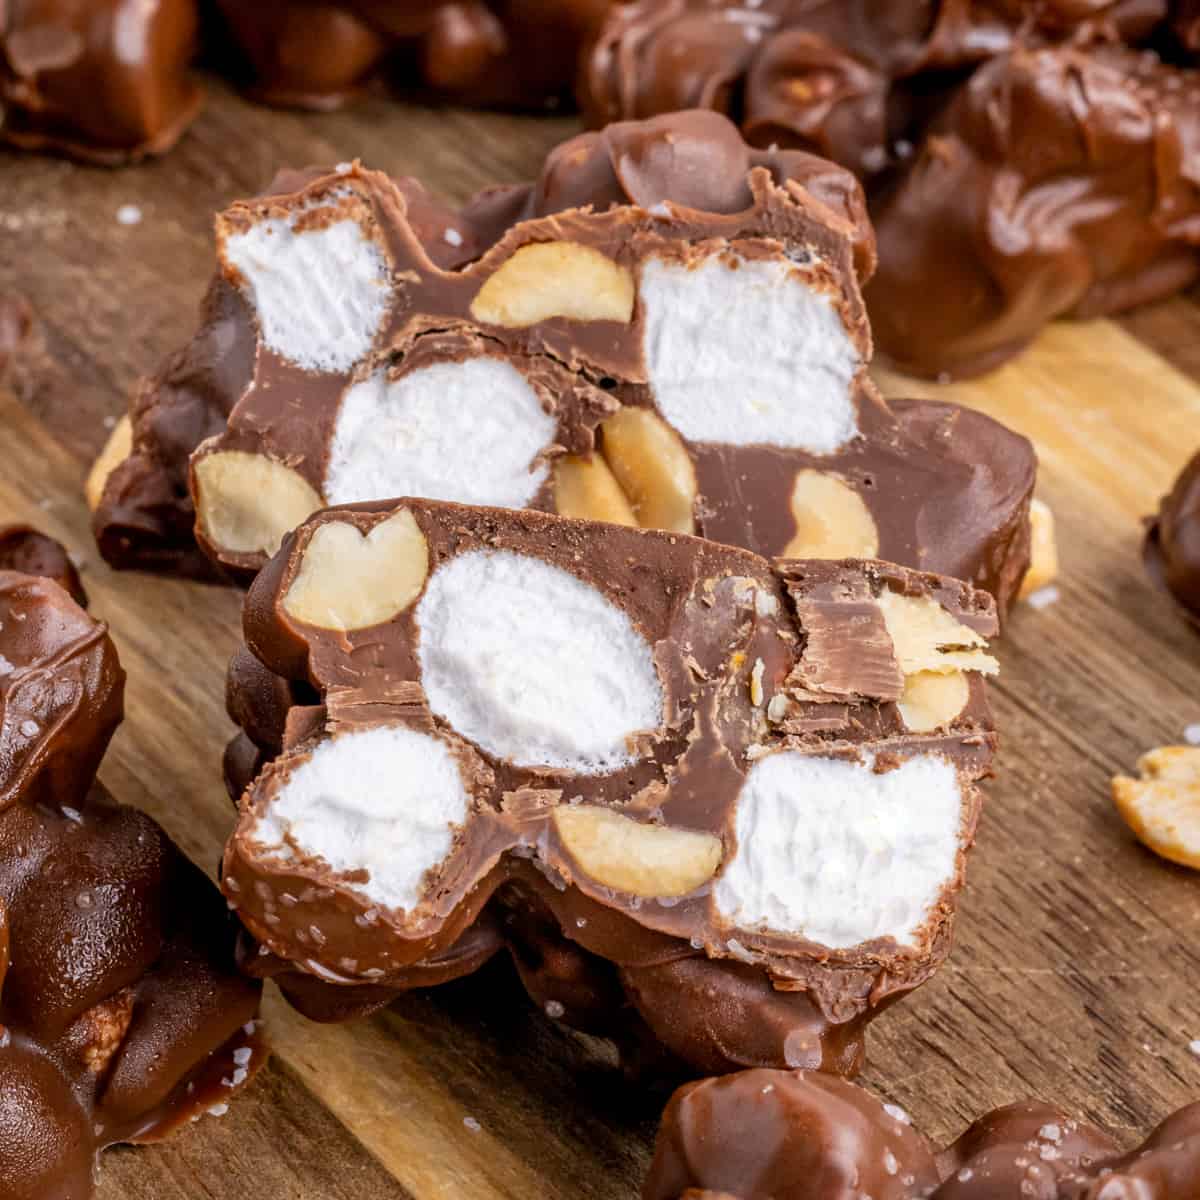 Rocky road candy on cutting board with one cut in half to show the marshmallows and peanuts inside in the chocolate clusters.